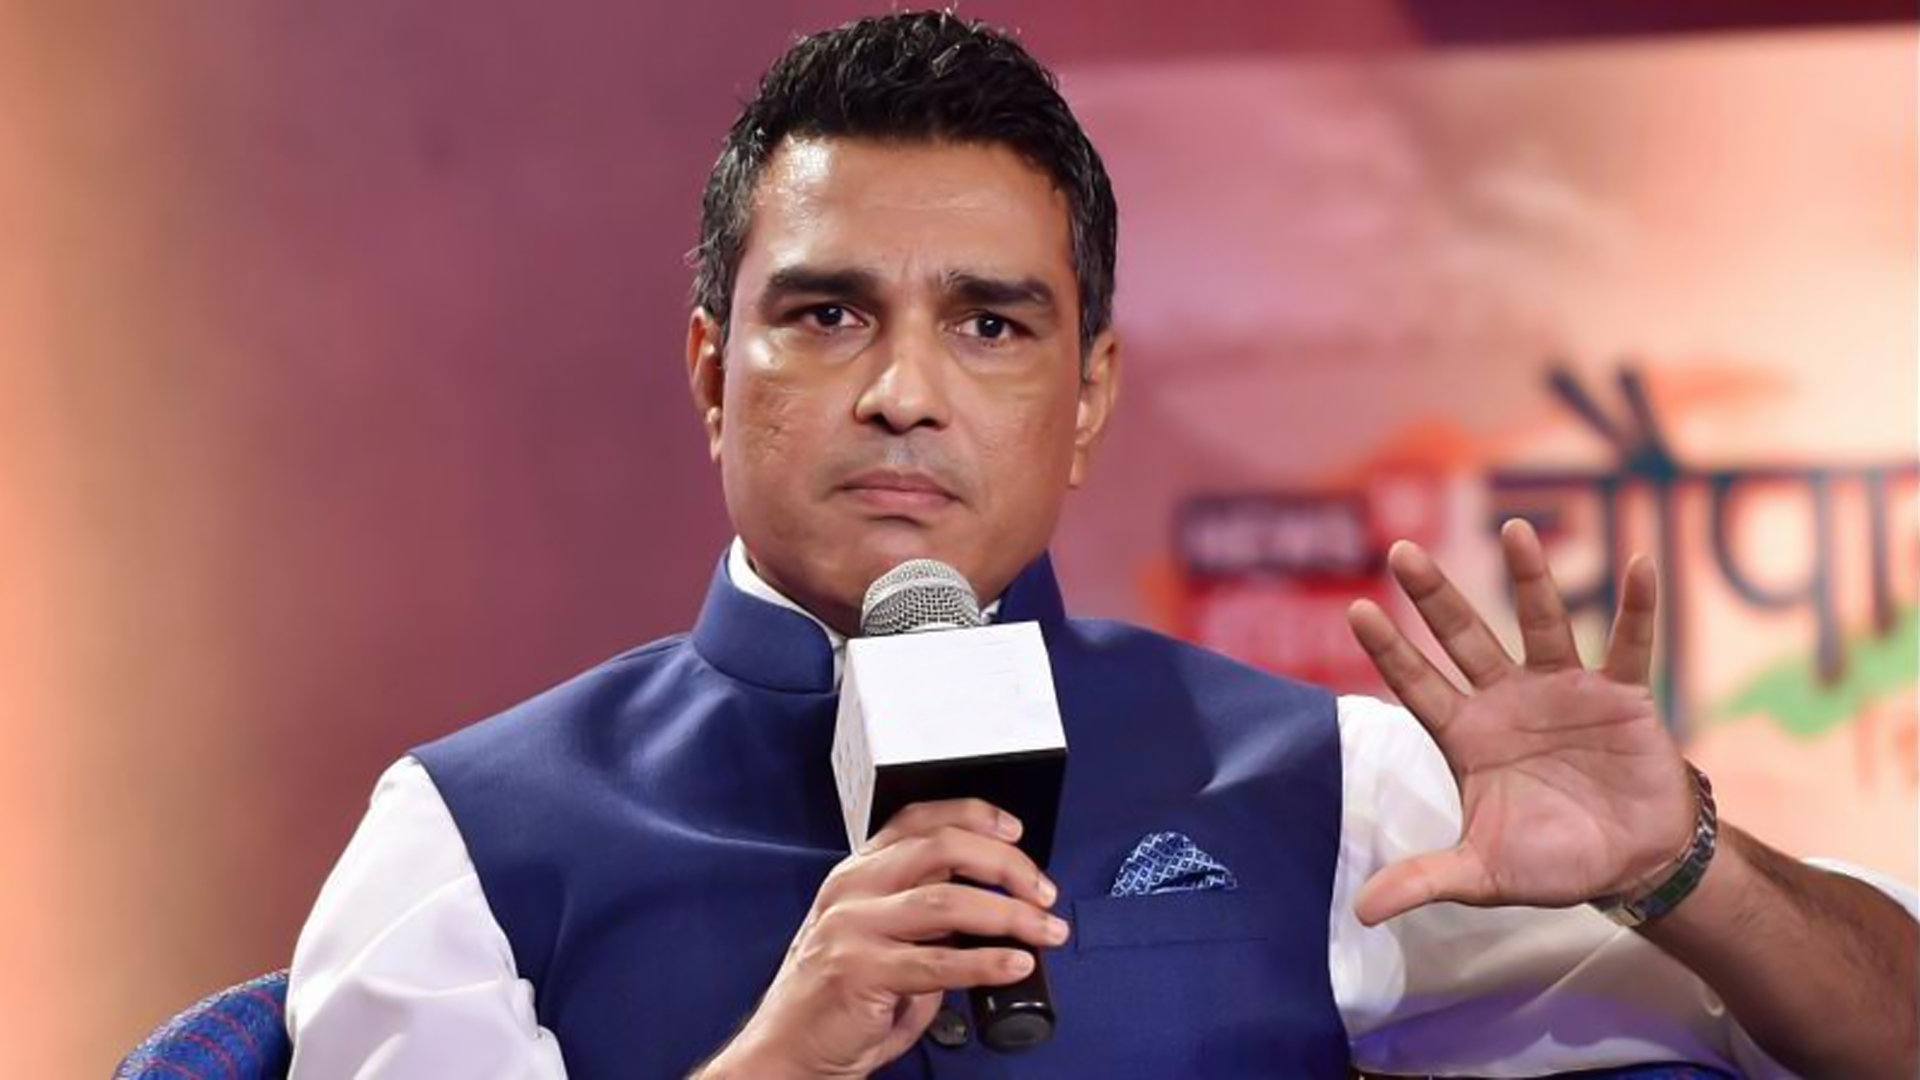 This Star Player Will Be The Most Expensive Buy In IPL 2023 Mini Auction, Predicts Sanjay Manjrekar